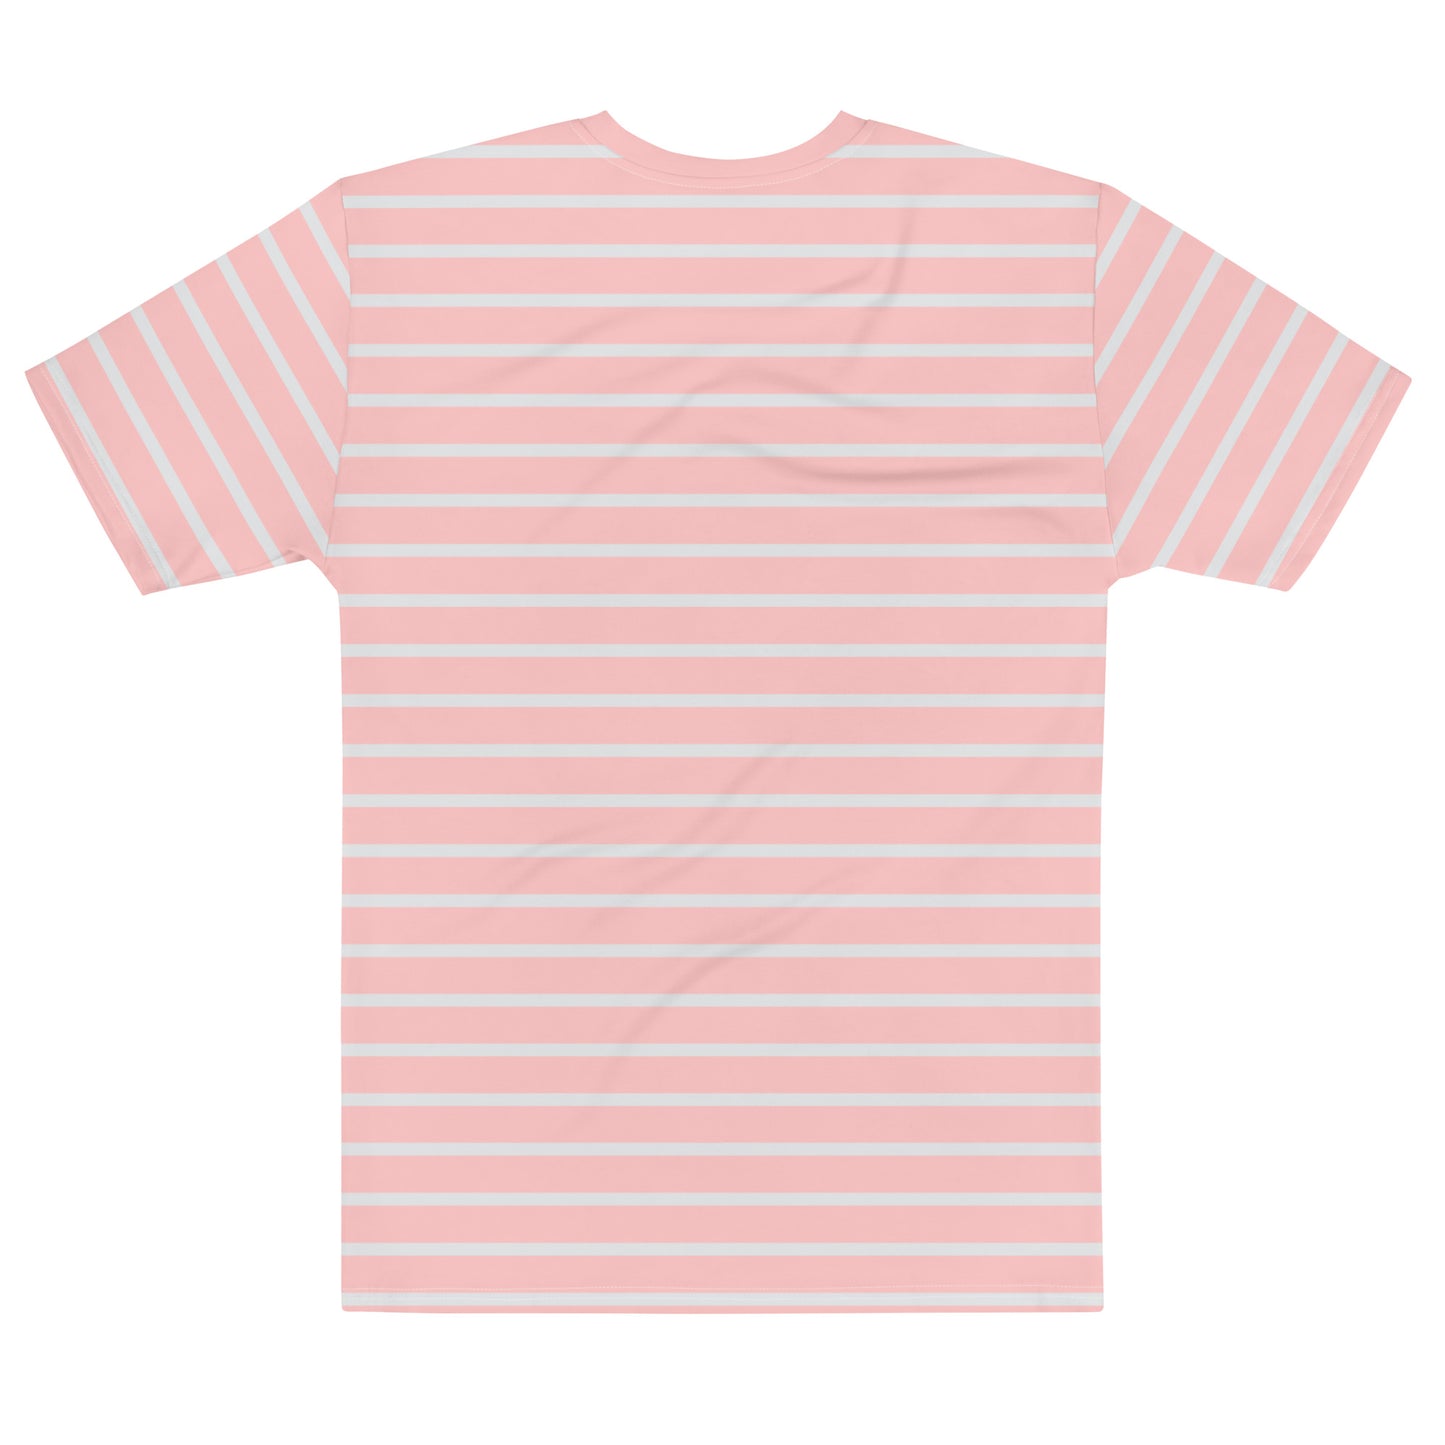 Swiftie Stripes - Inspired By Taylor Swift - Sustainably Made Men’s Short Sleeve Tee